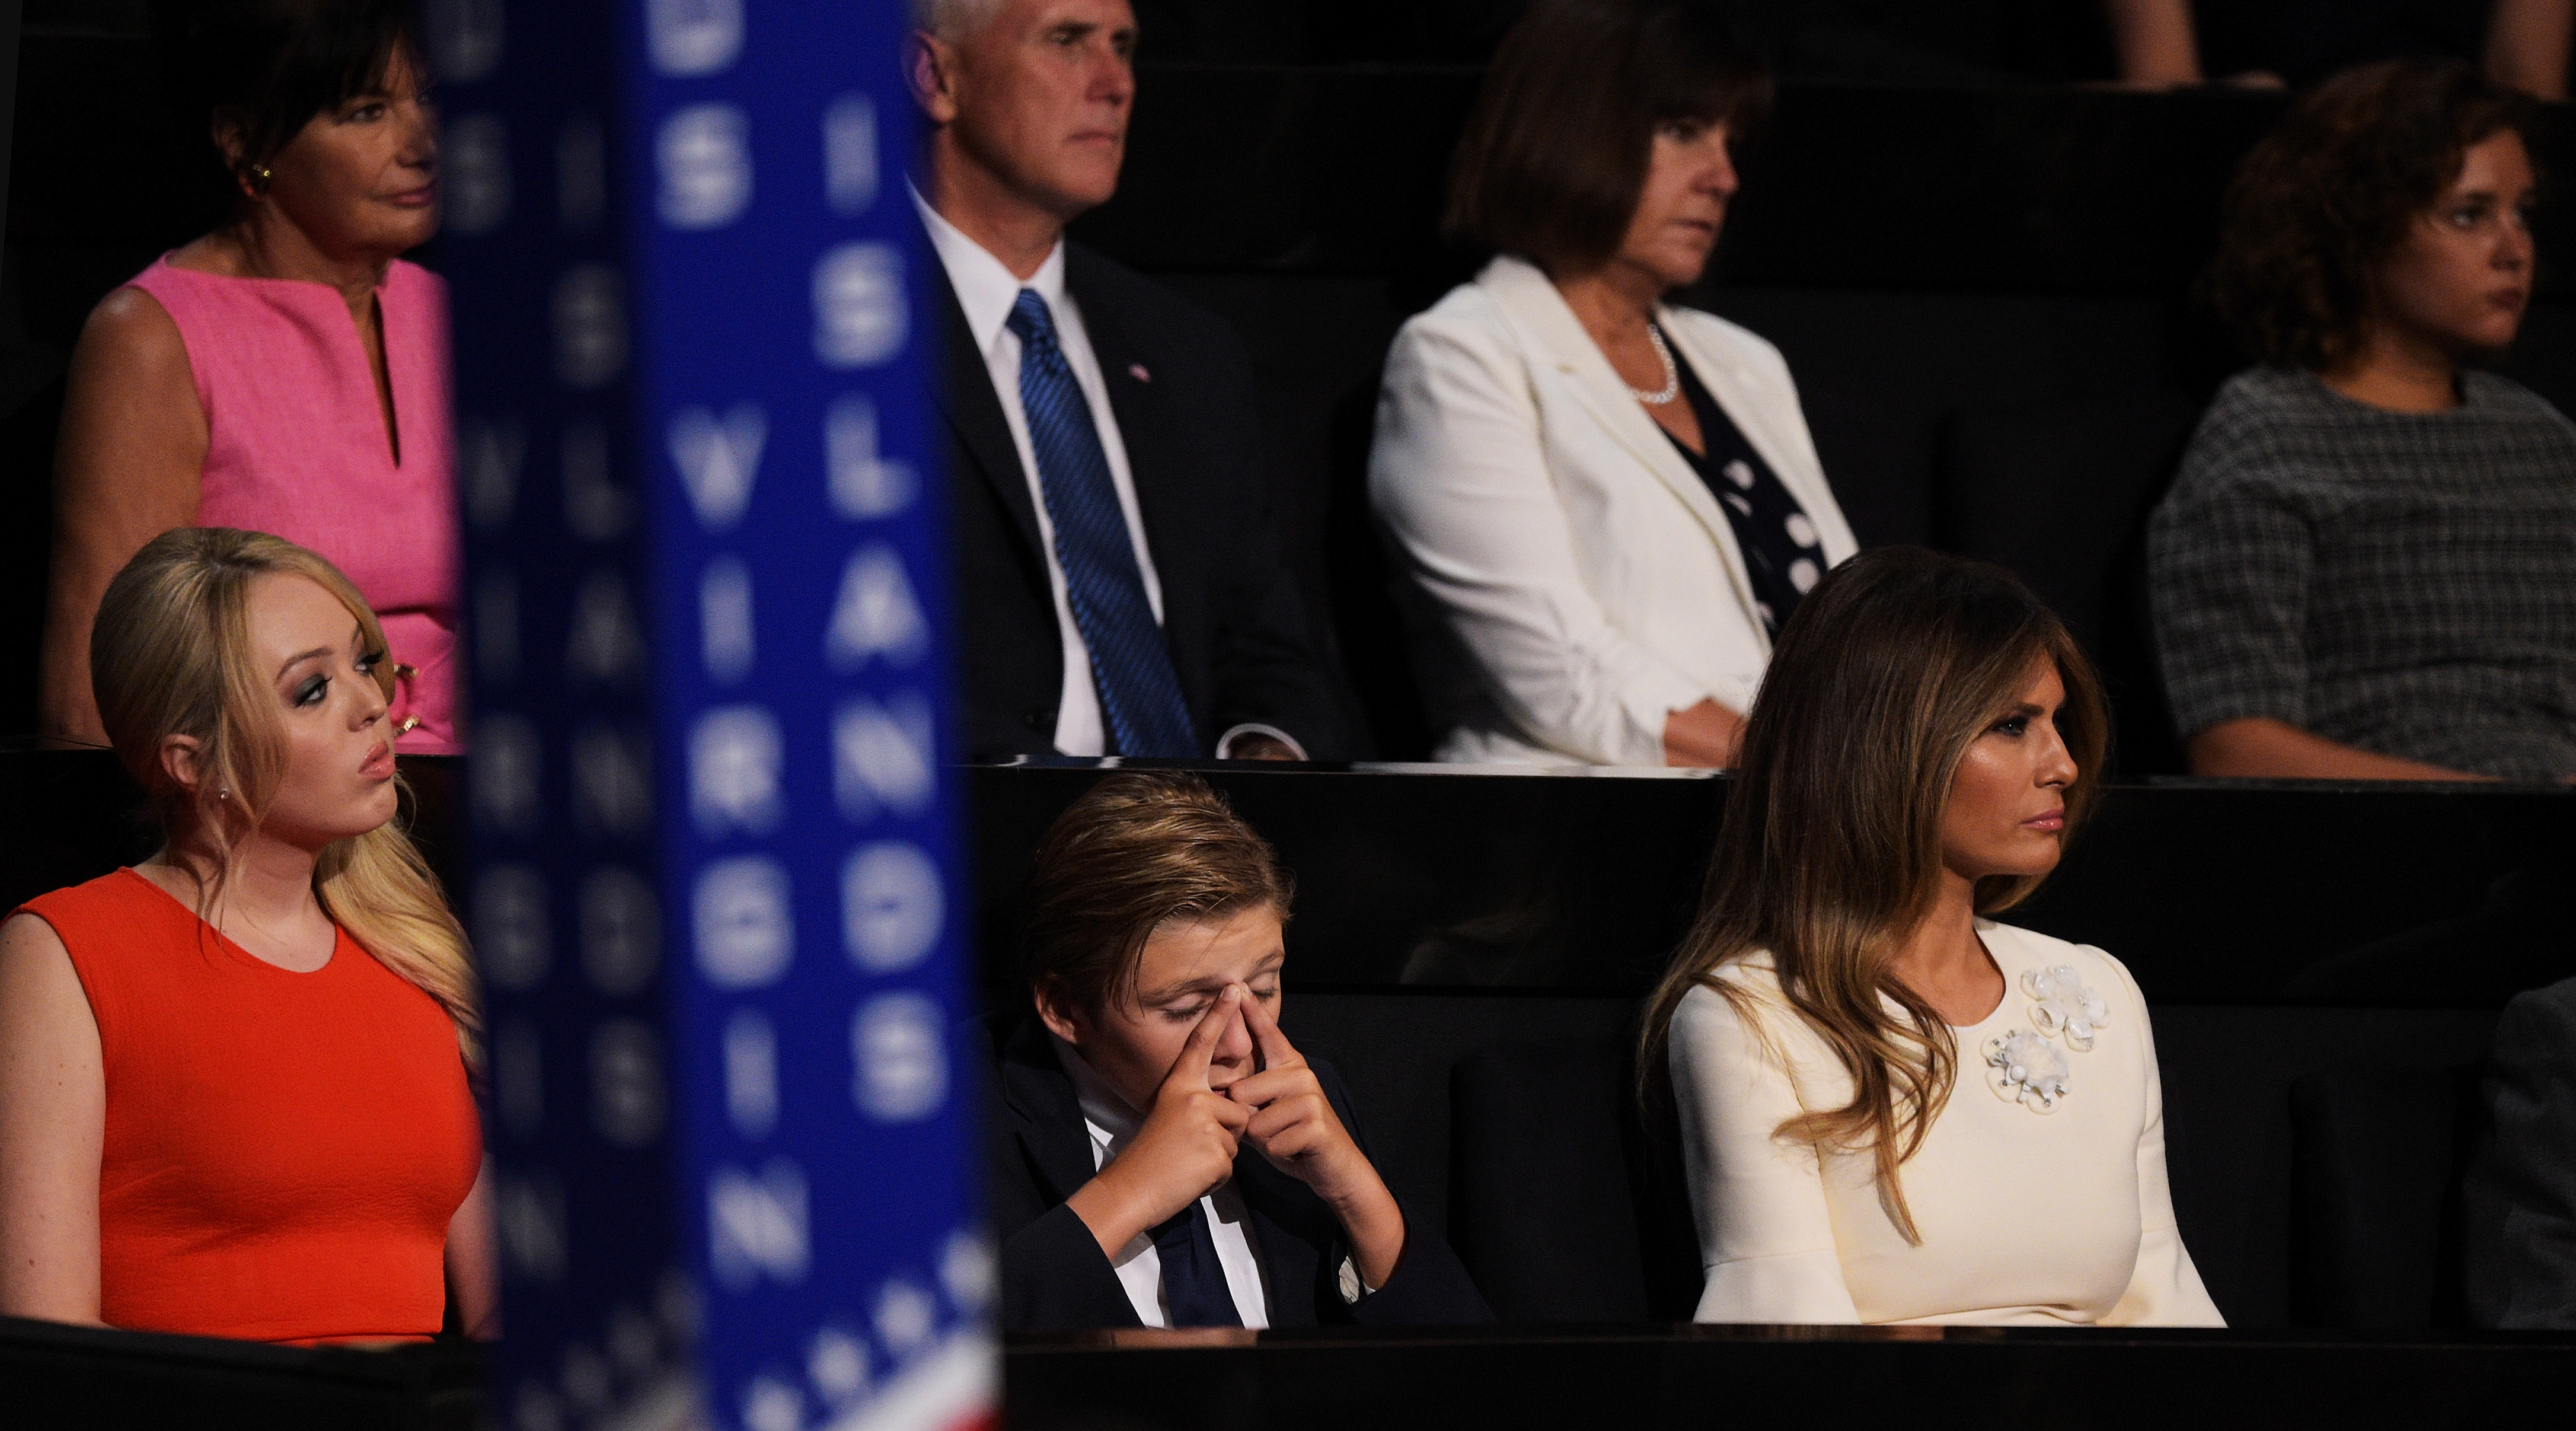 Did Barron Trump Roll His Eyes When Dad Donald Trump Talked About